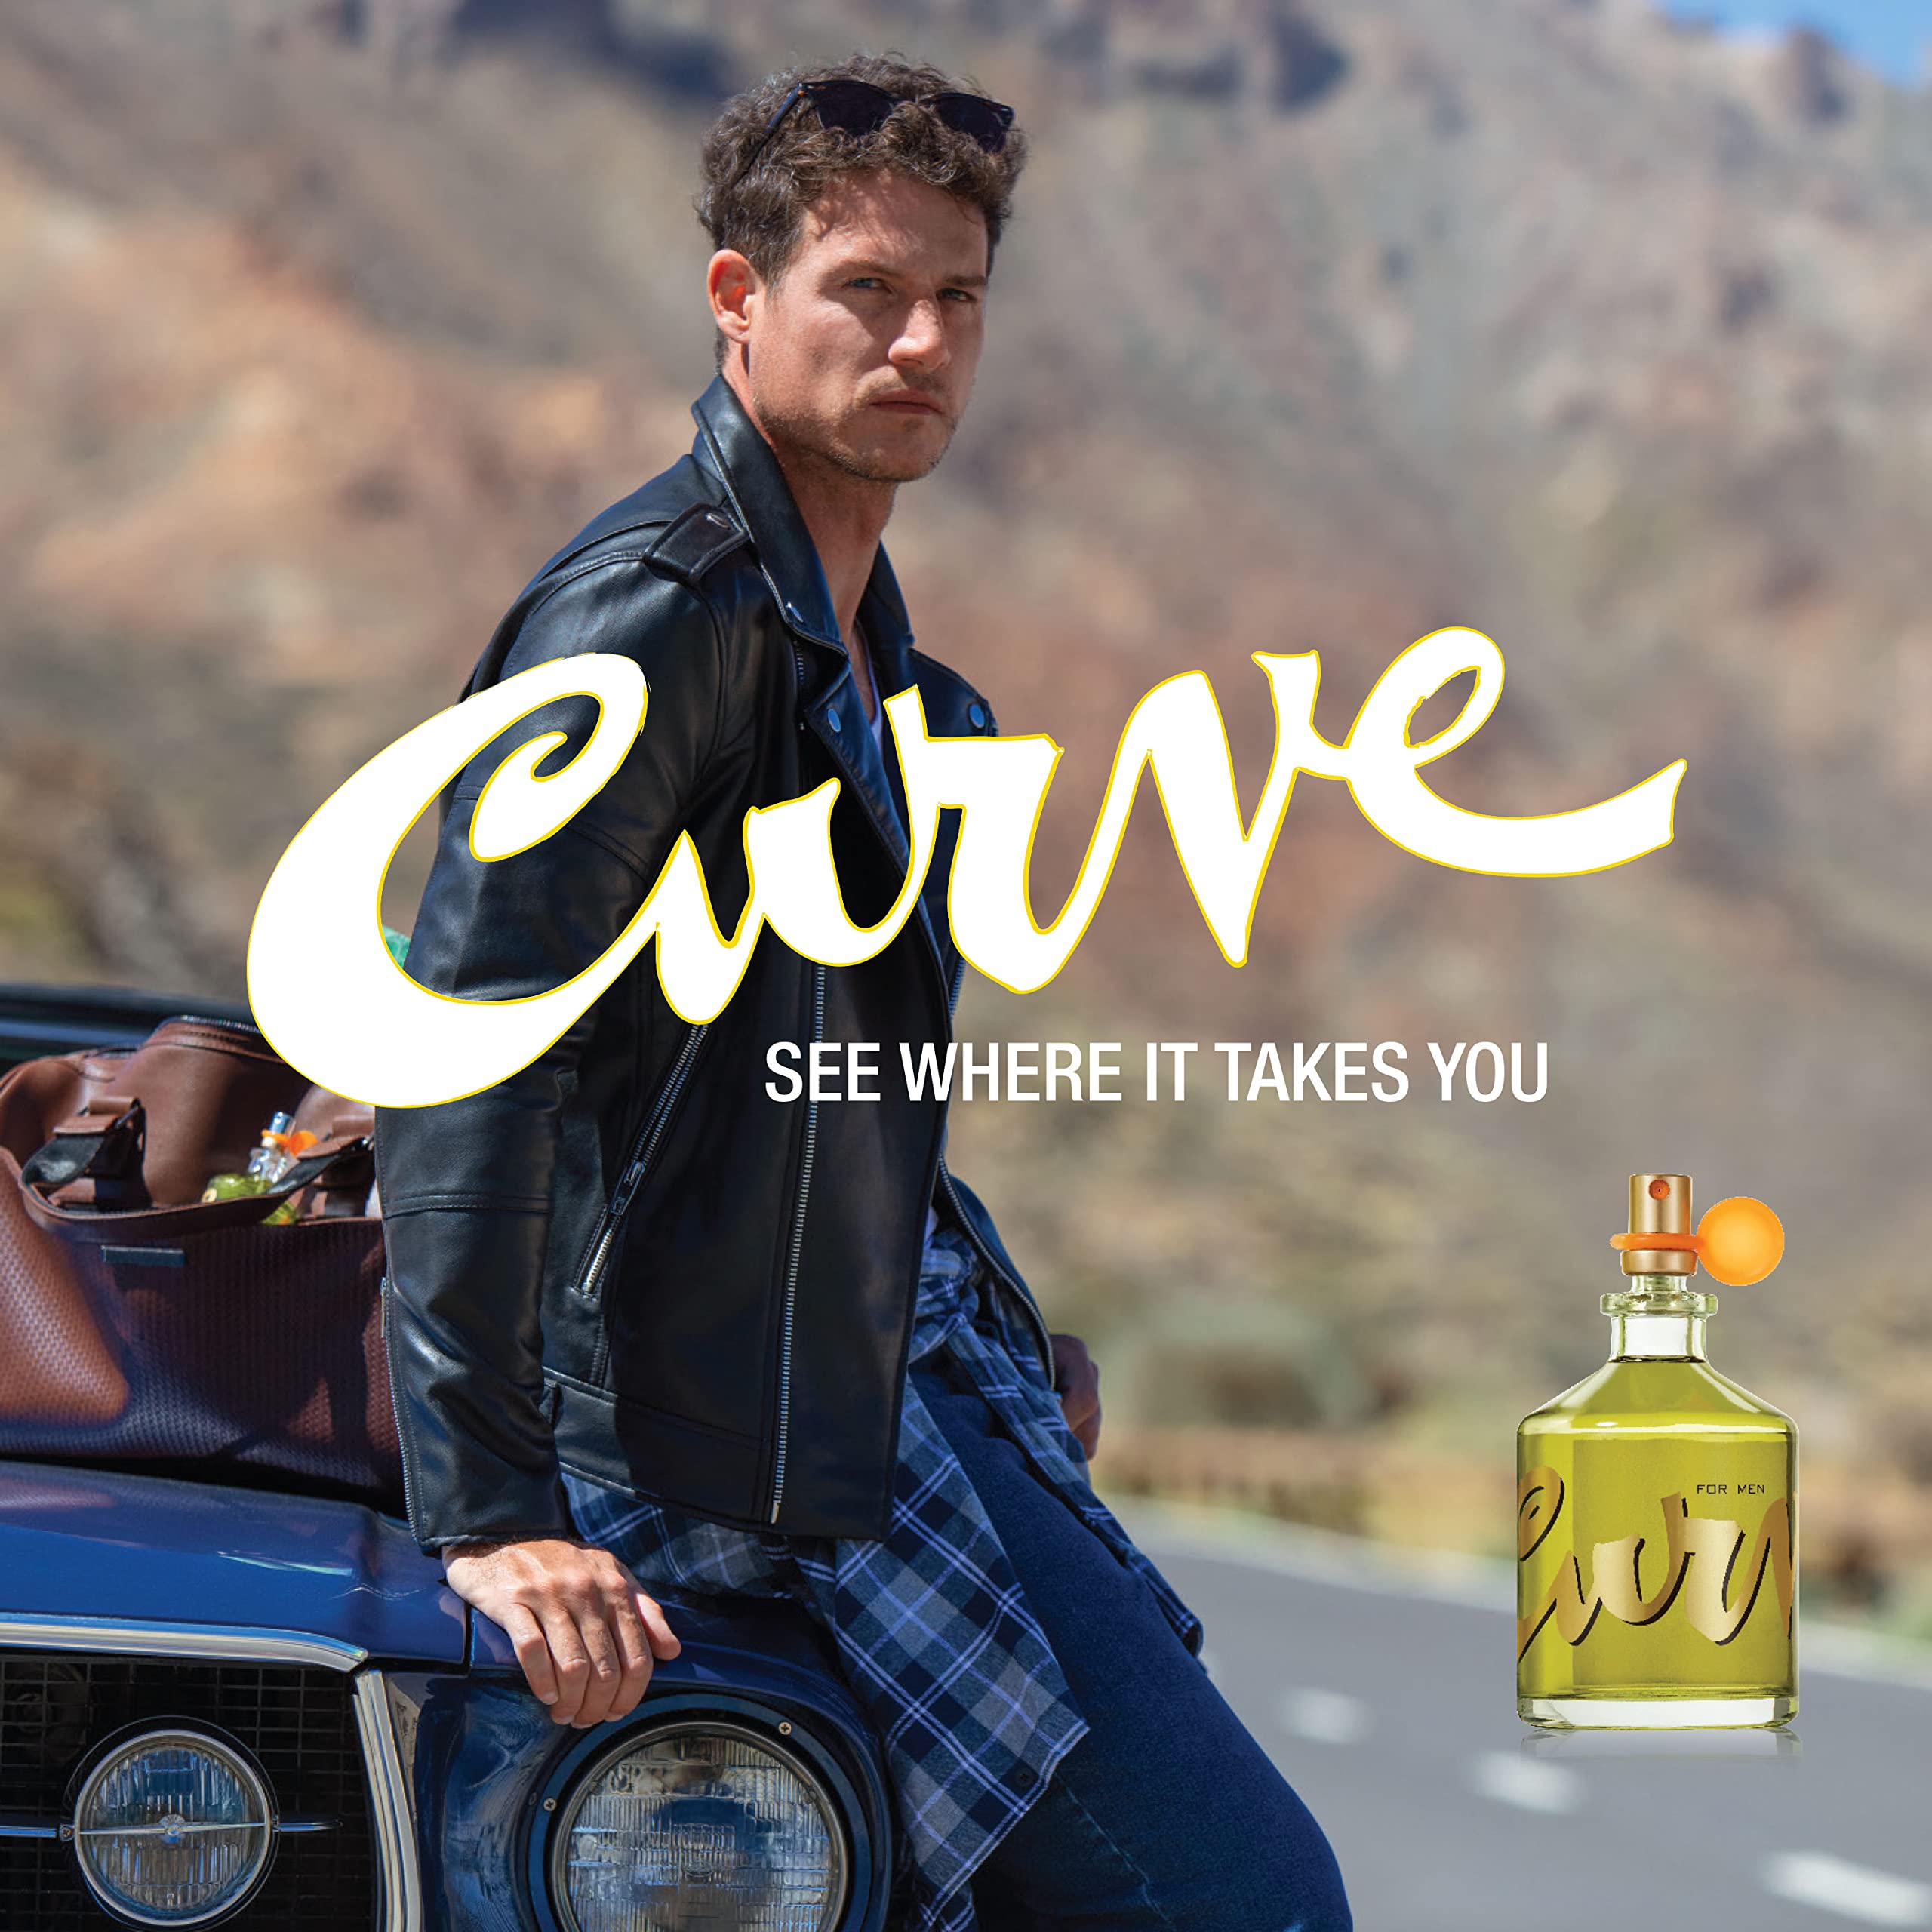 Curve Men's Cologne Fragrance Set, Deodorant, Aftershave Balm & Cologne, Spicy Wood Magnetic Scent, 3 Piece Set & Men's Cologne Fragrance Spray, Casual Cool Day or Night Scent, Black, 4.2 Fl Oz